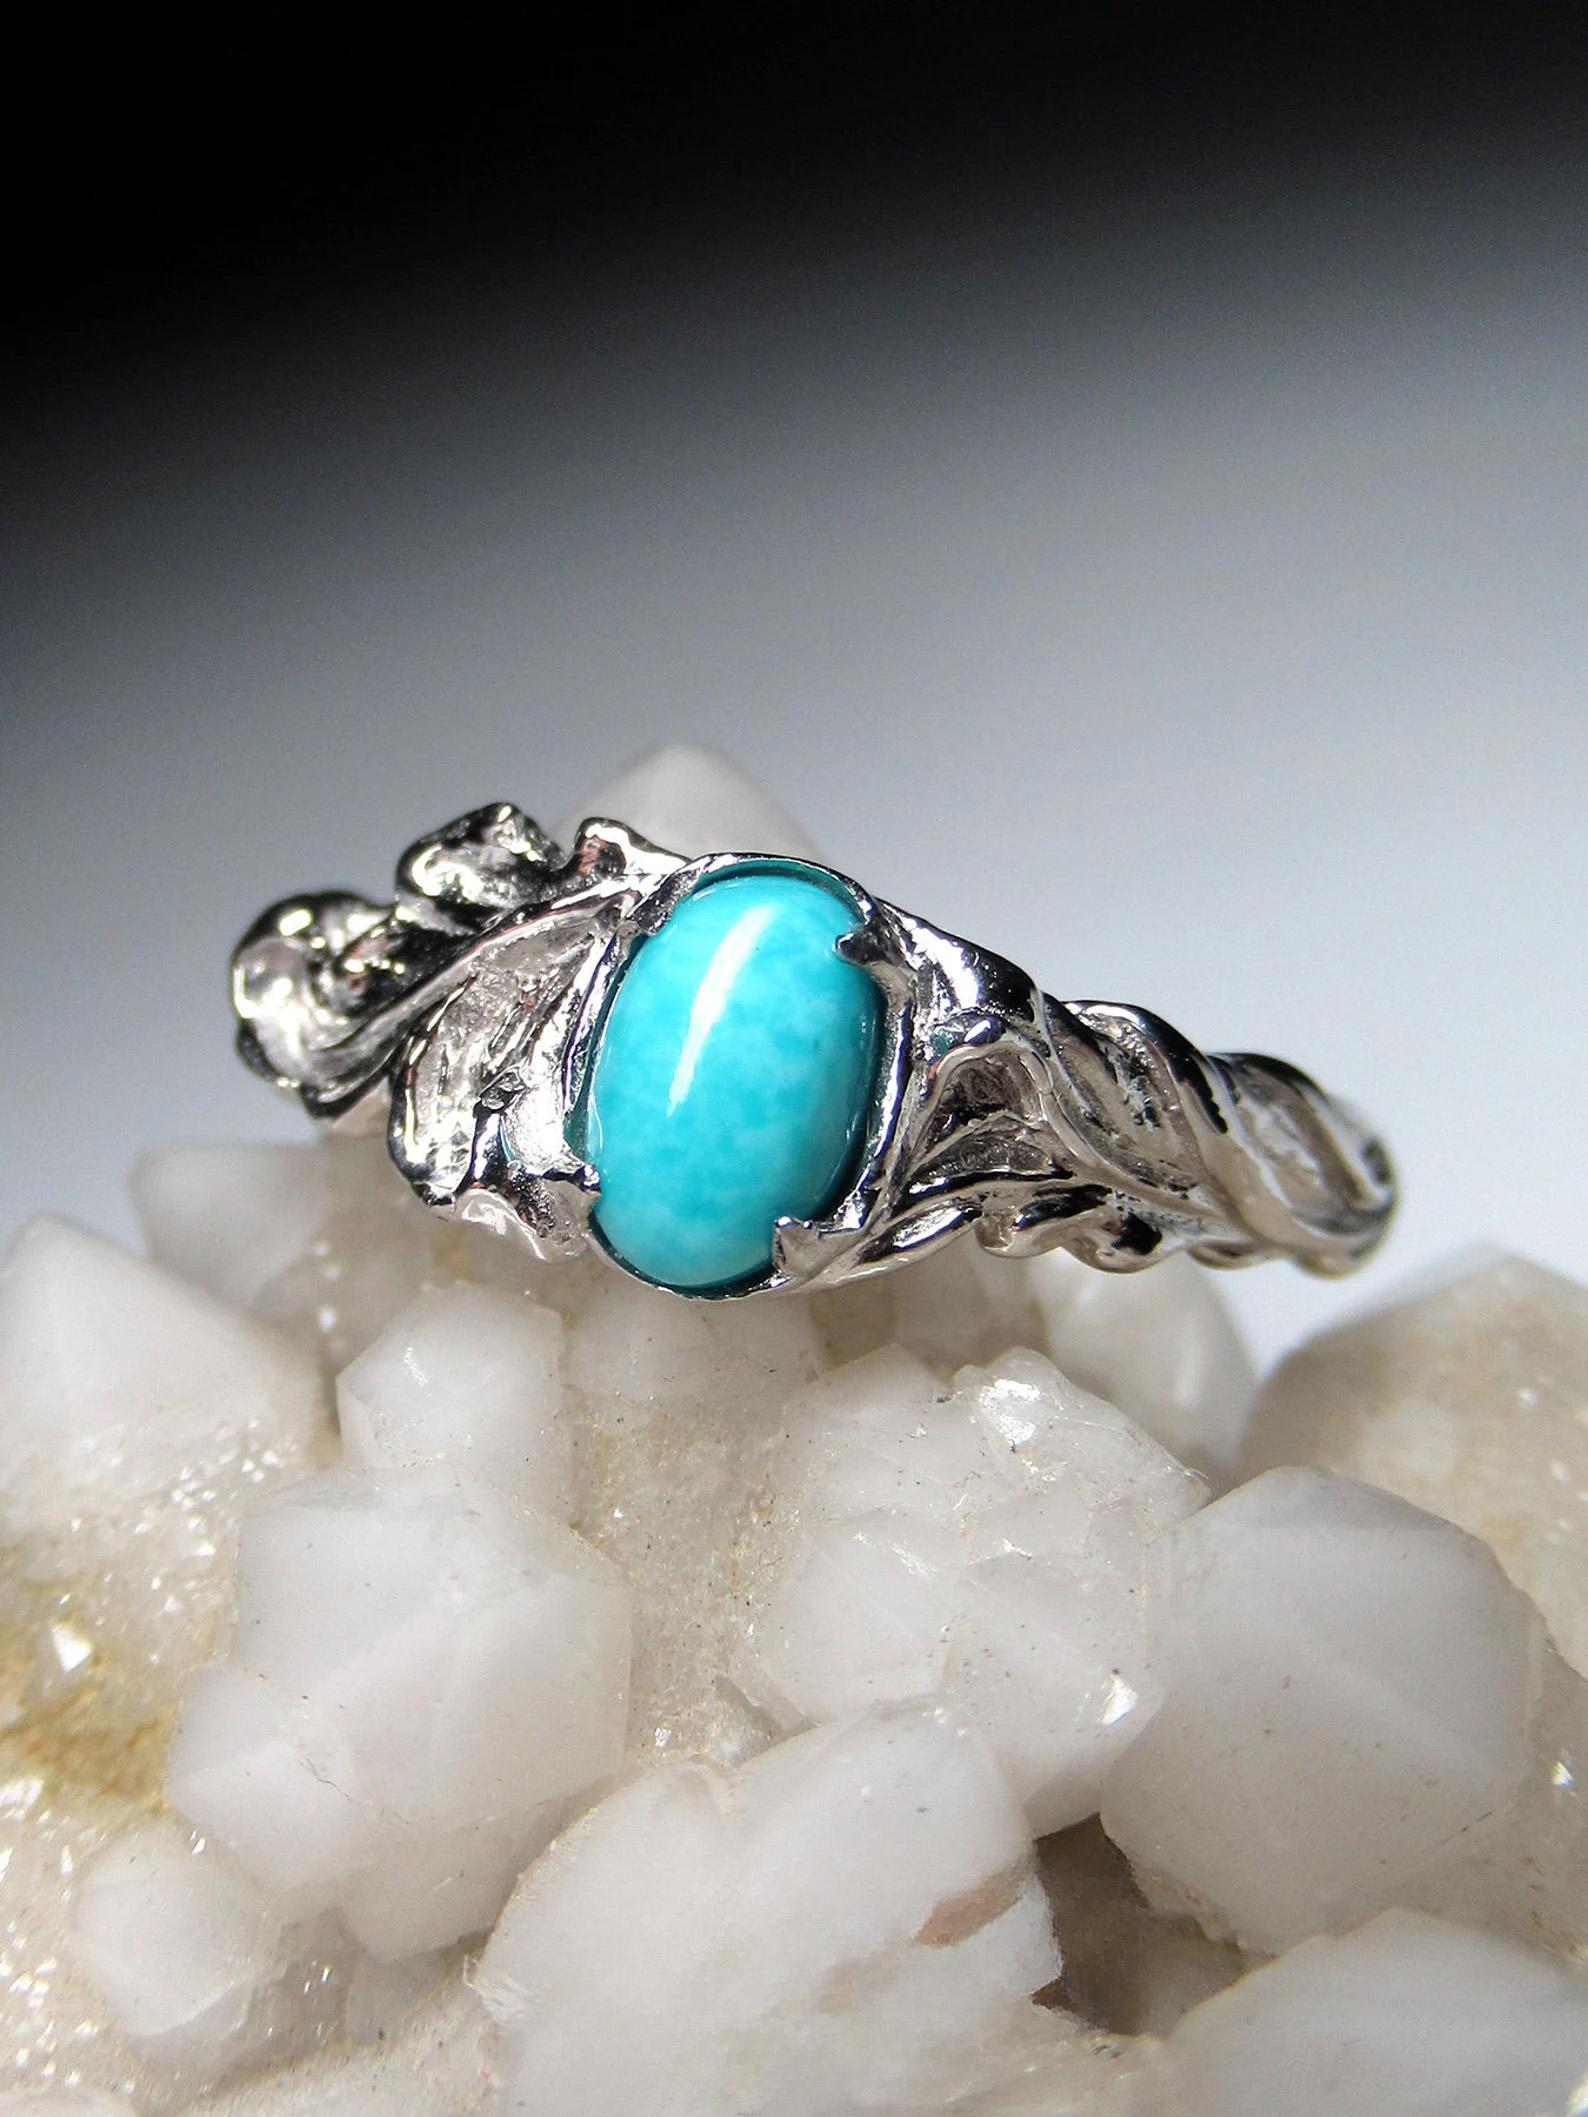 Silver ring with natural Turquoise 
gemstone origin - USA
gem size is 0.12 x 0.16 x 0.24 in / 3 x 4 x 6 mm
turquoise weight - 0.44 carat
ring size - 7 US
ring weight - 2.19 grams